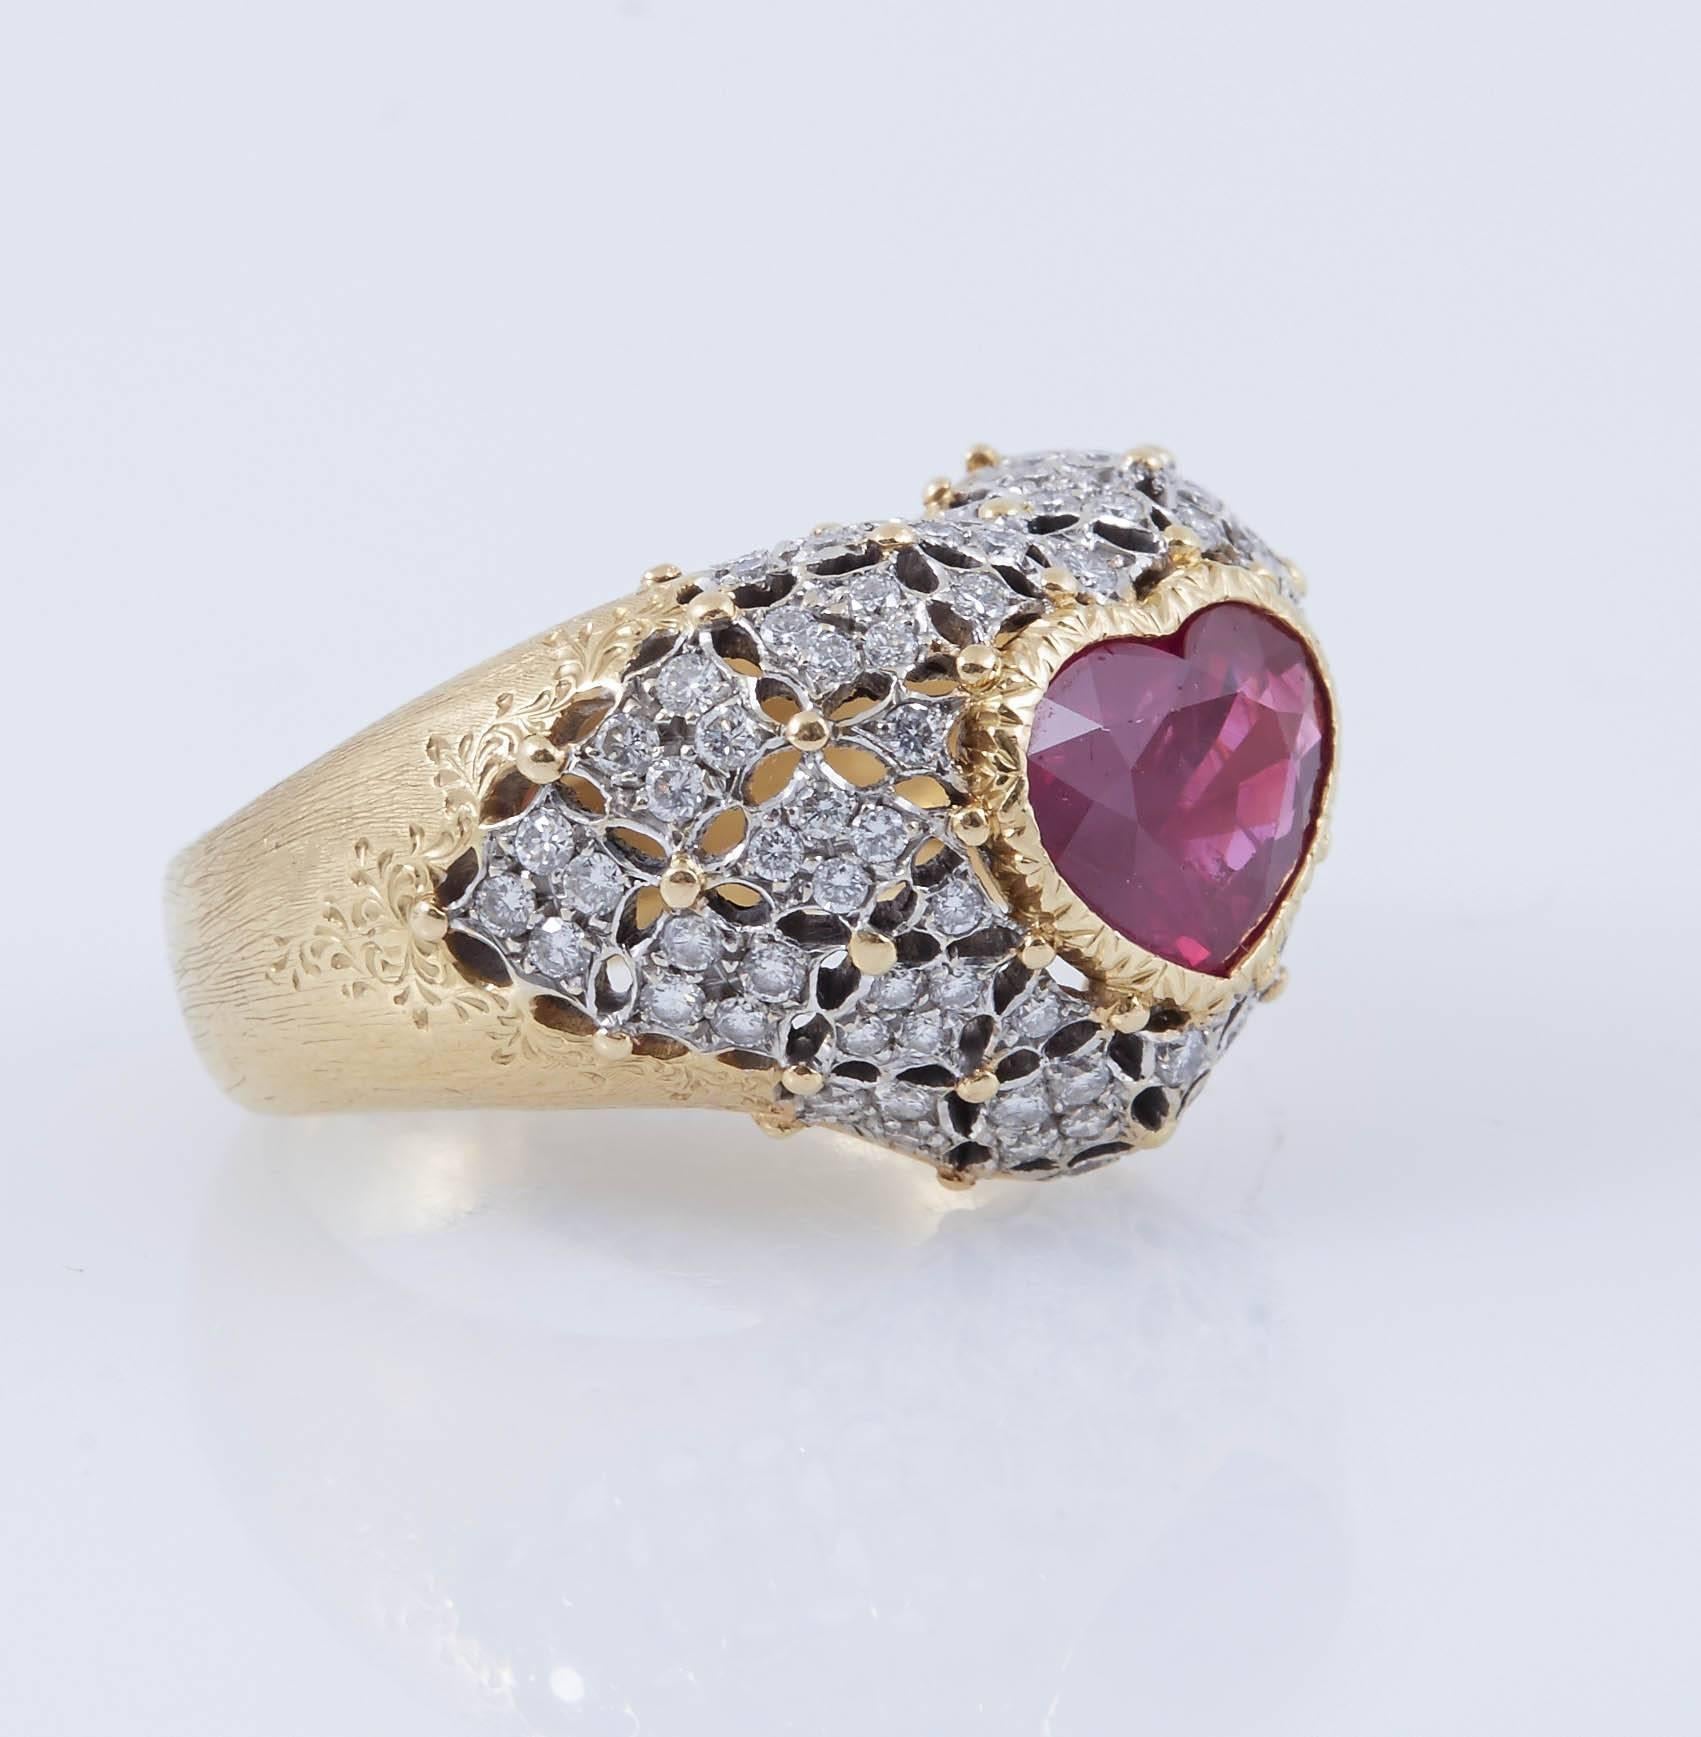 Beautiful heart shaped dinner ring, with natural ruby at the center, weighing approximately 2.50 carat accented with round brilliant-cut diamonds, weighing approximately 2.00 carat mounted in 18k yellow gold and platinum. Signed Buccellati.